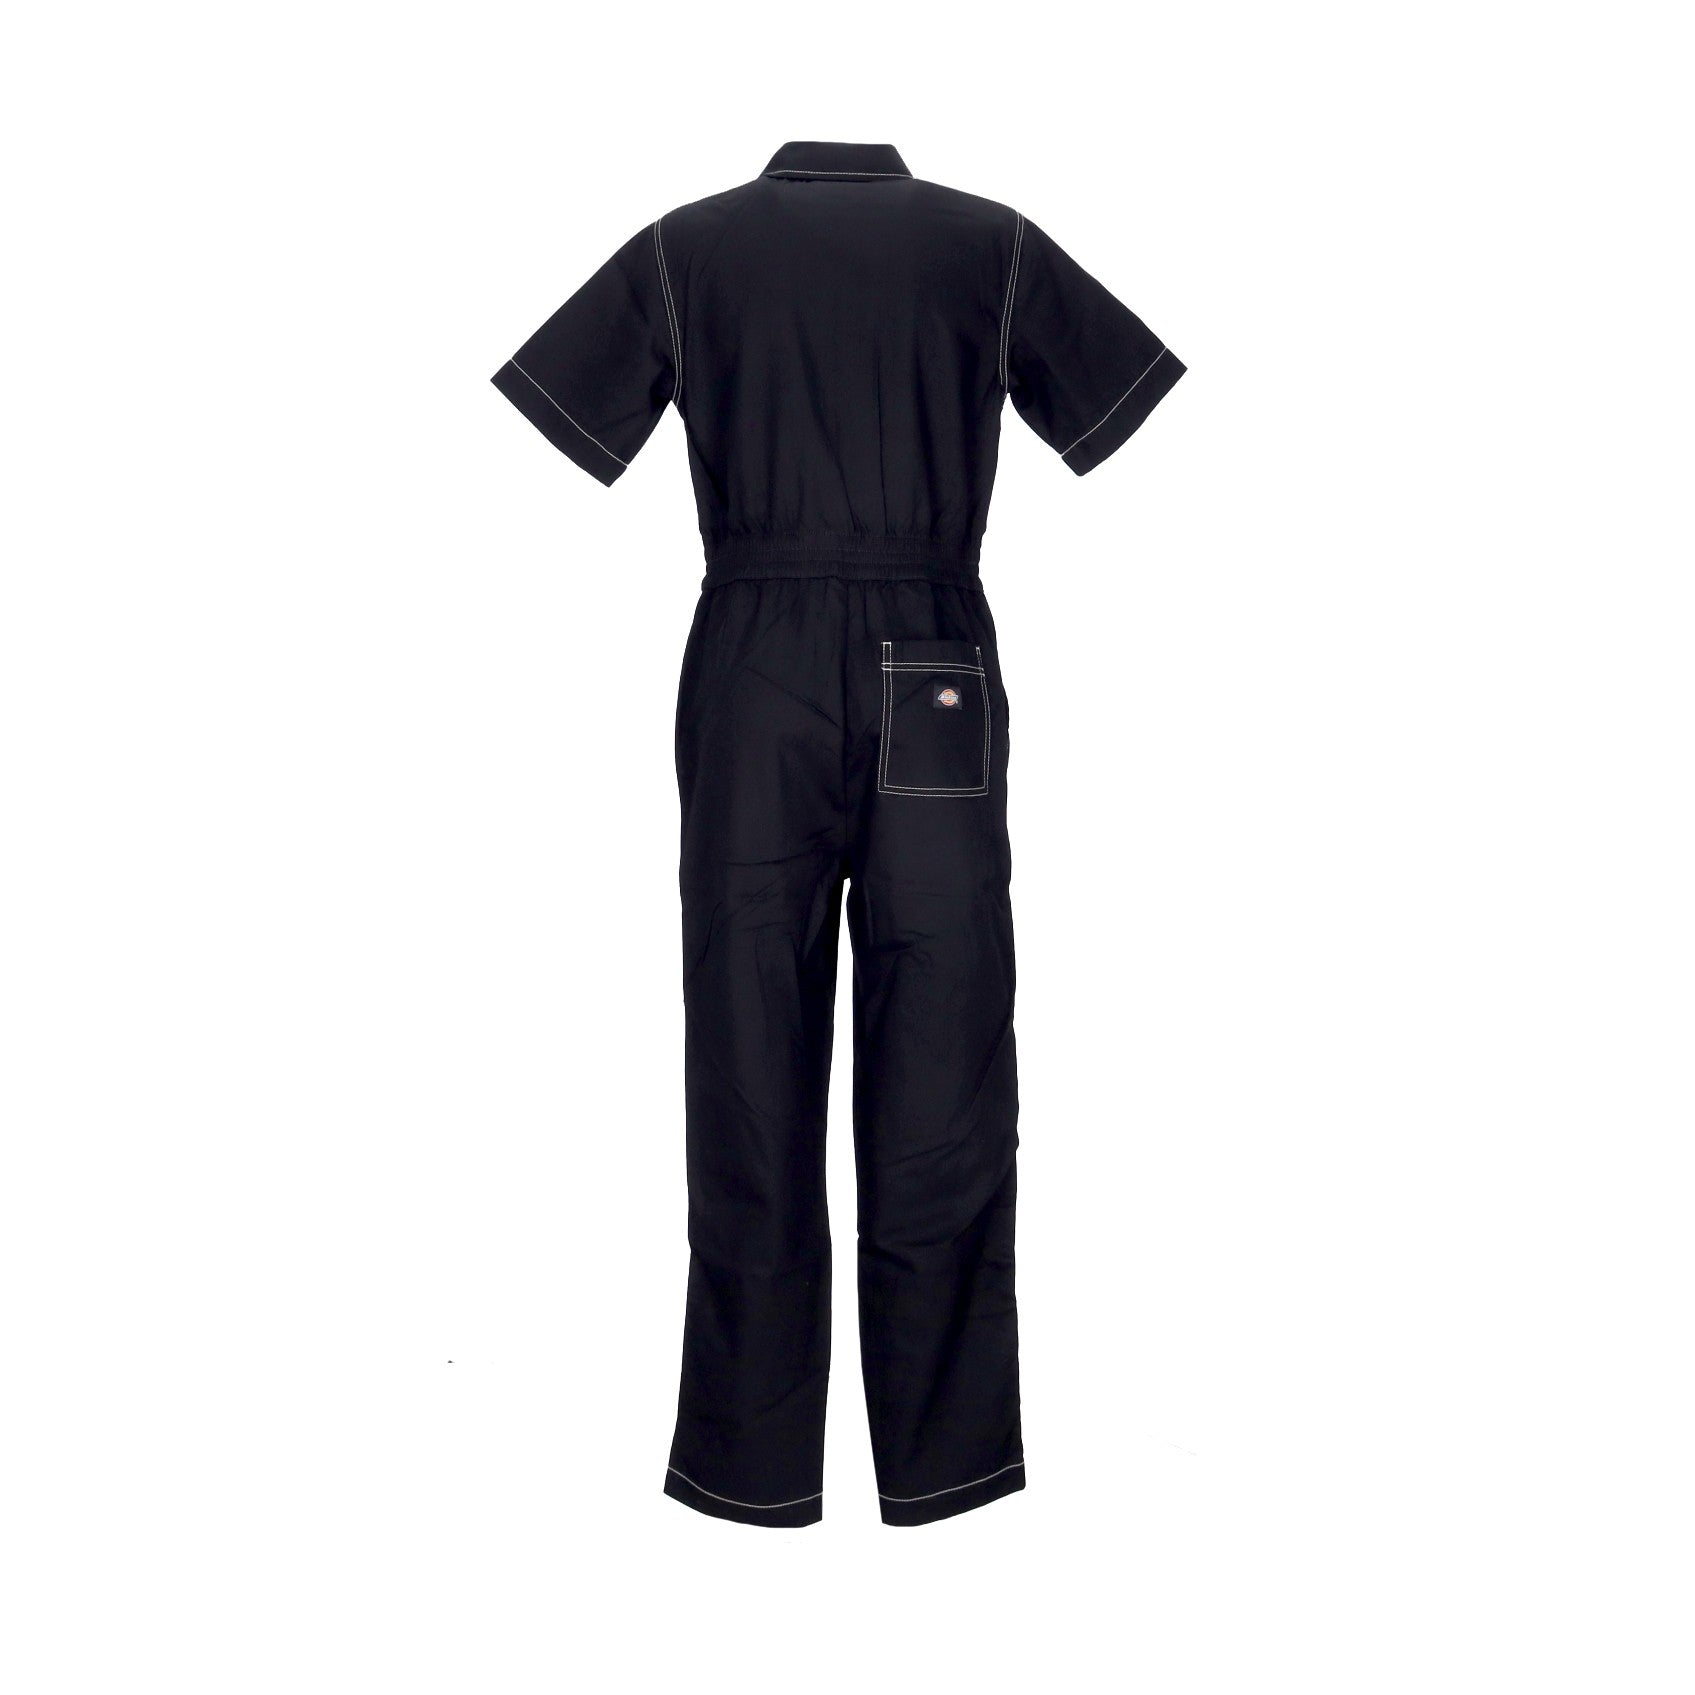 Florala Coverall Black Women's Tracksuit